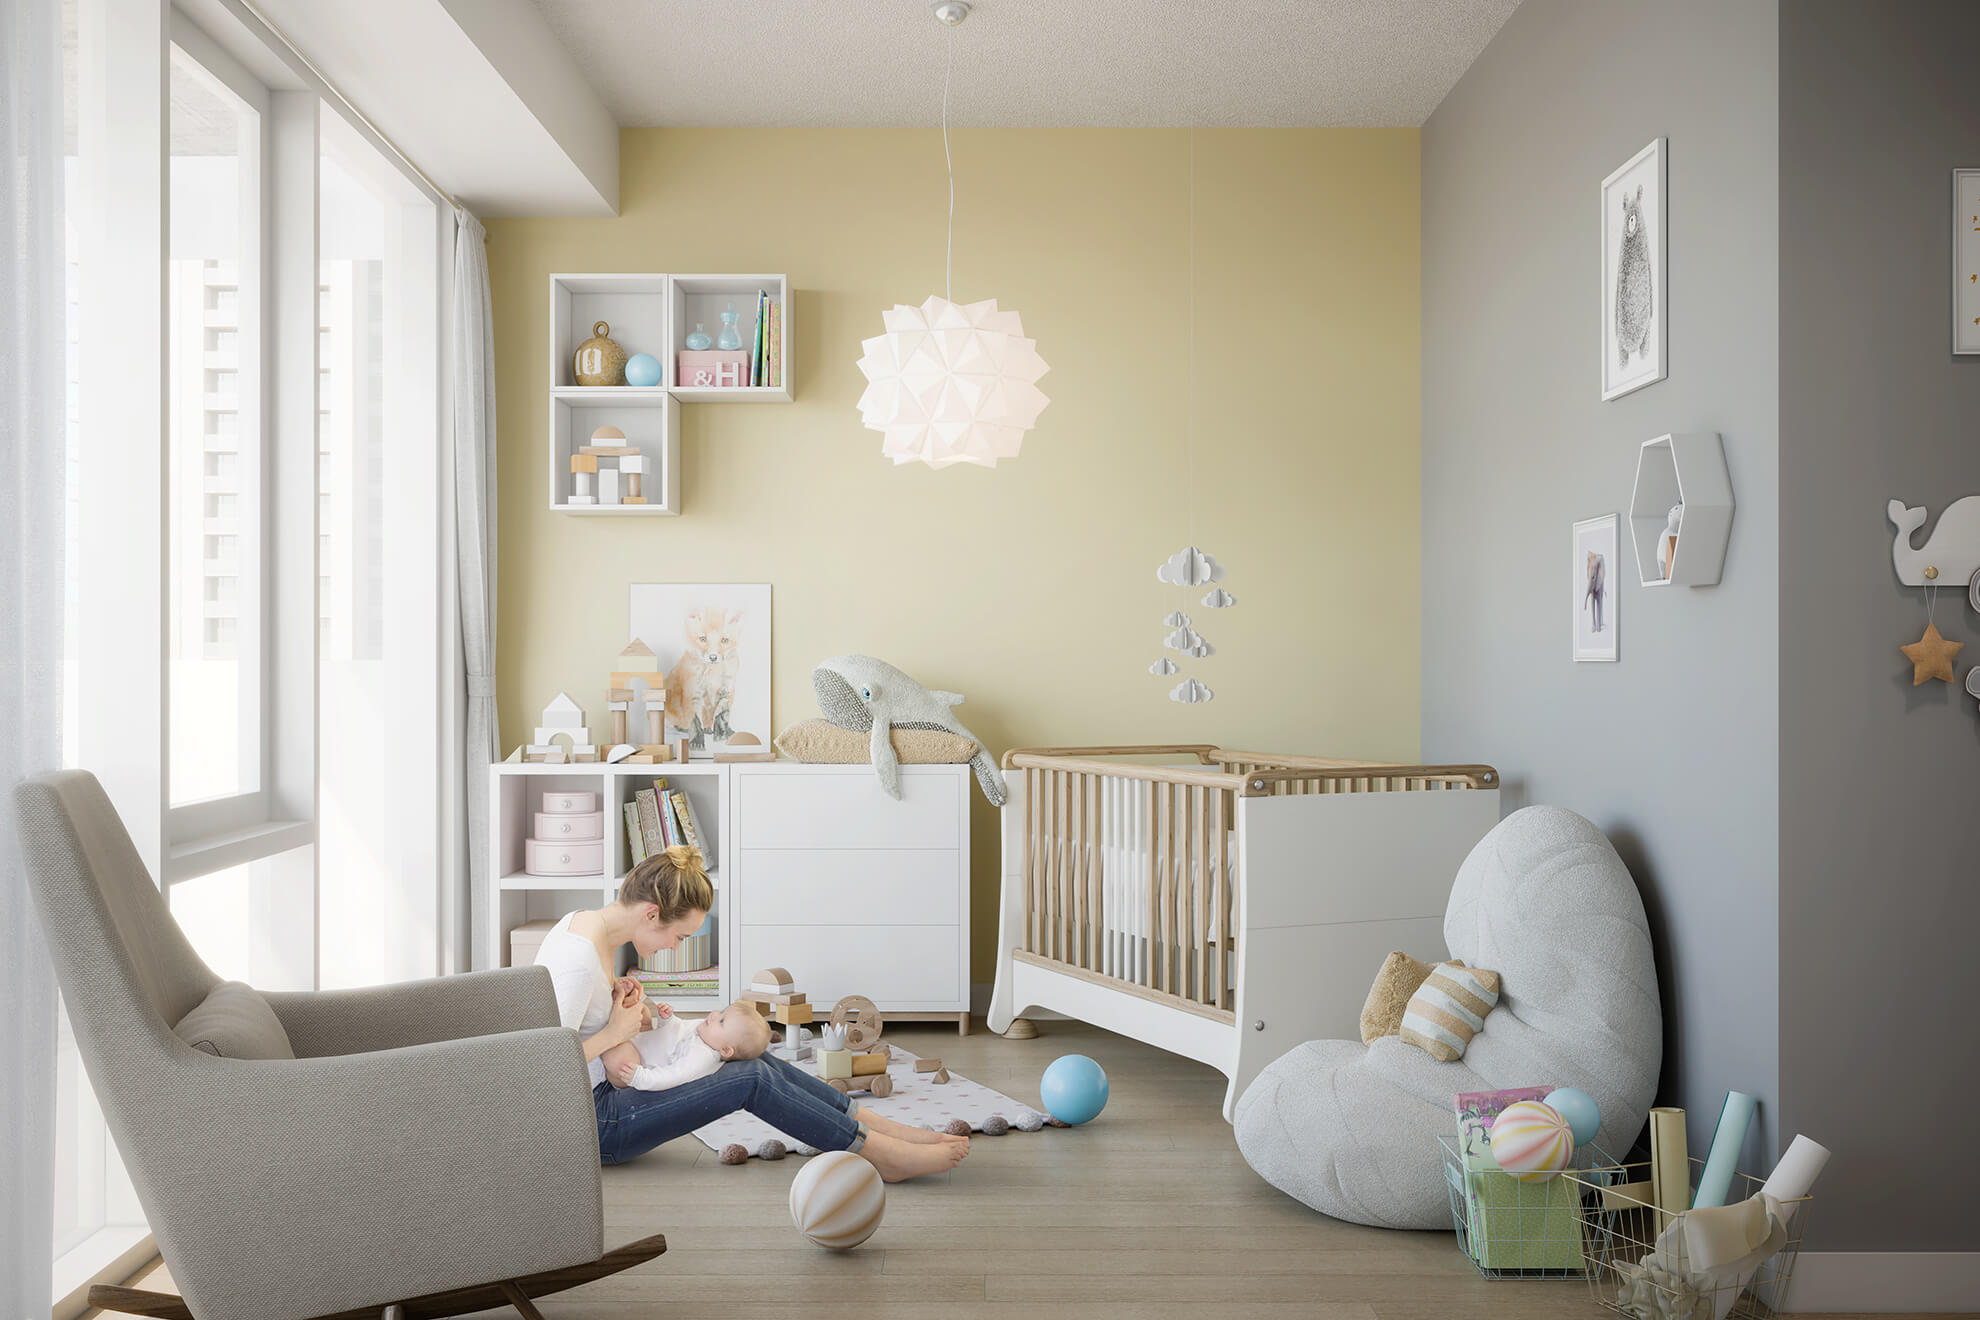 Wesley Tower render of the Kids Room - mum playing with her baby